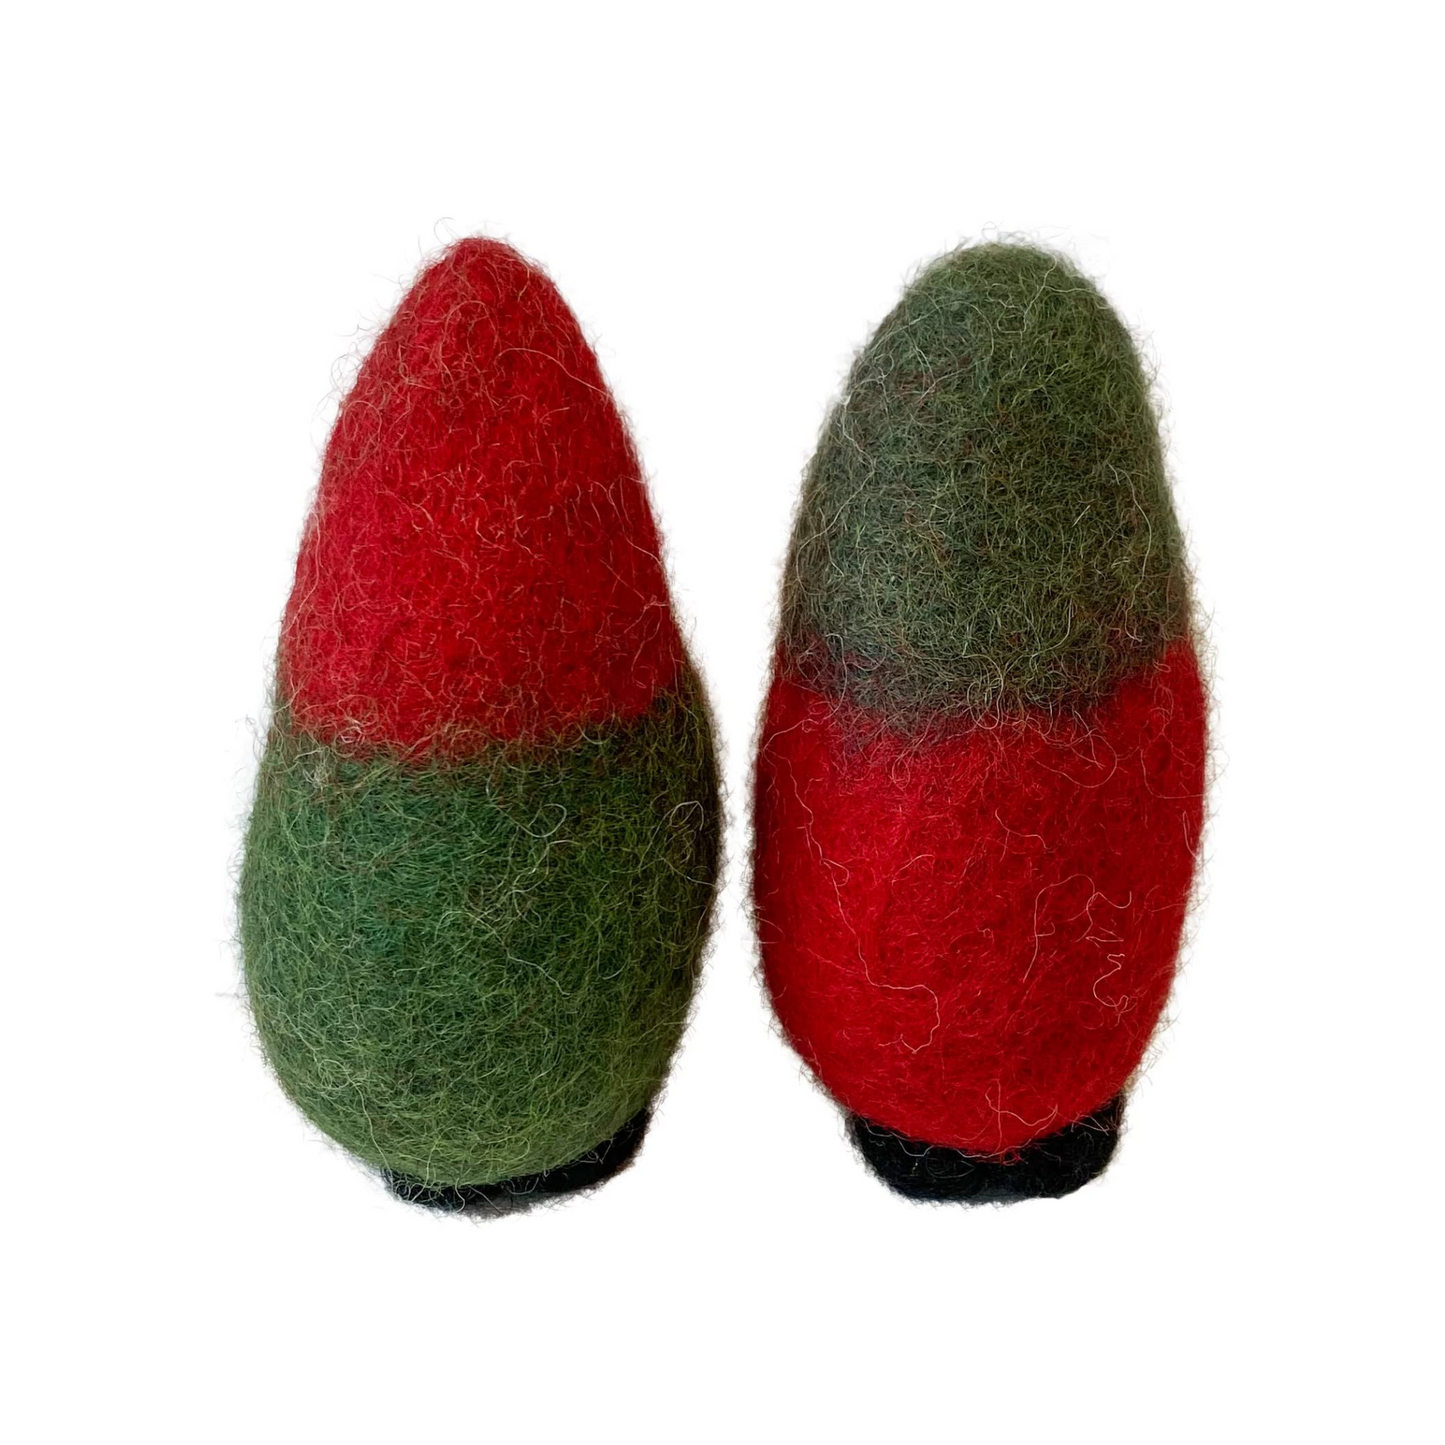 Midlee Felt Wool Gnome Christmas Cat Toy- Set of 2